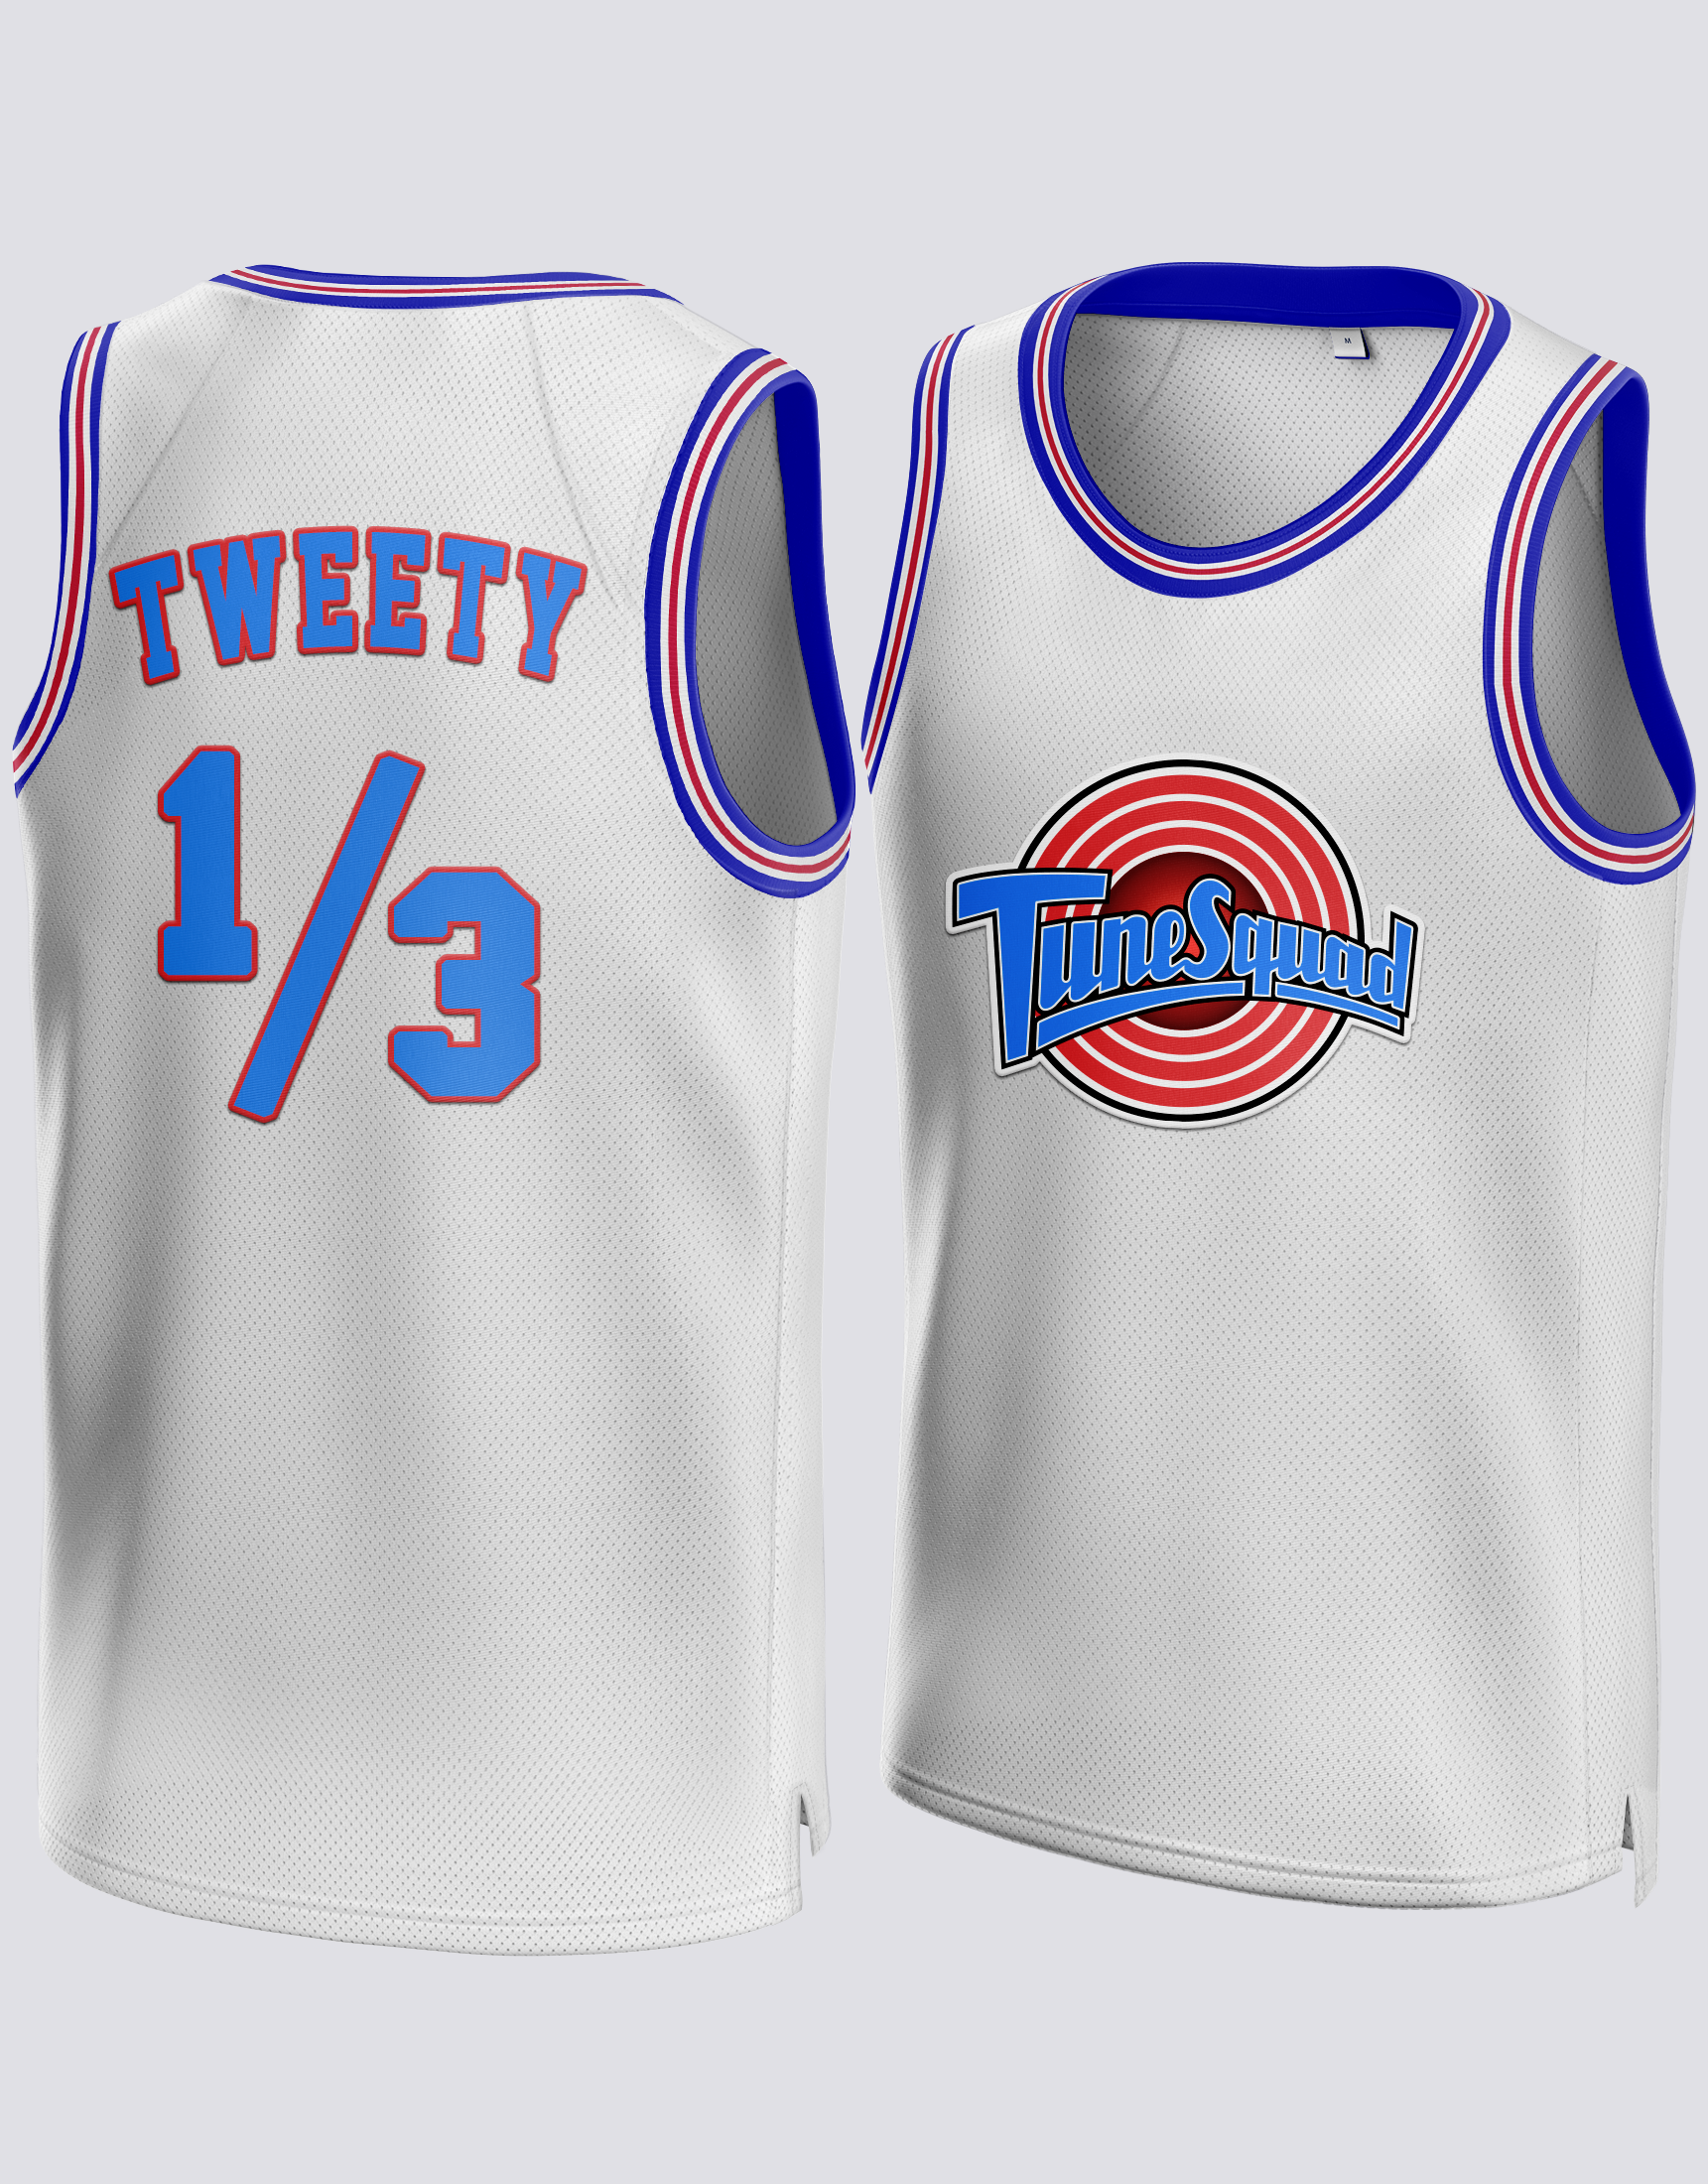 Buy cheap Tweety Space Jam jersey online. The jersey is from the movie Space  Jam. The name and numbers are stitched. Free…